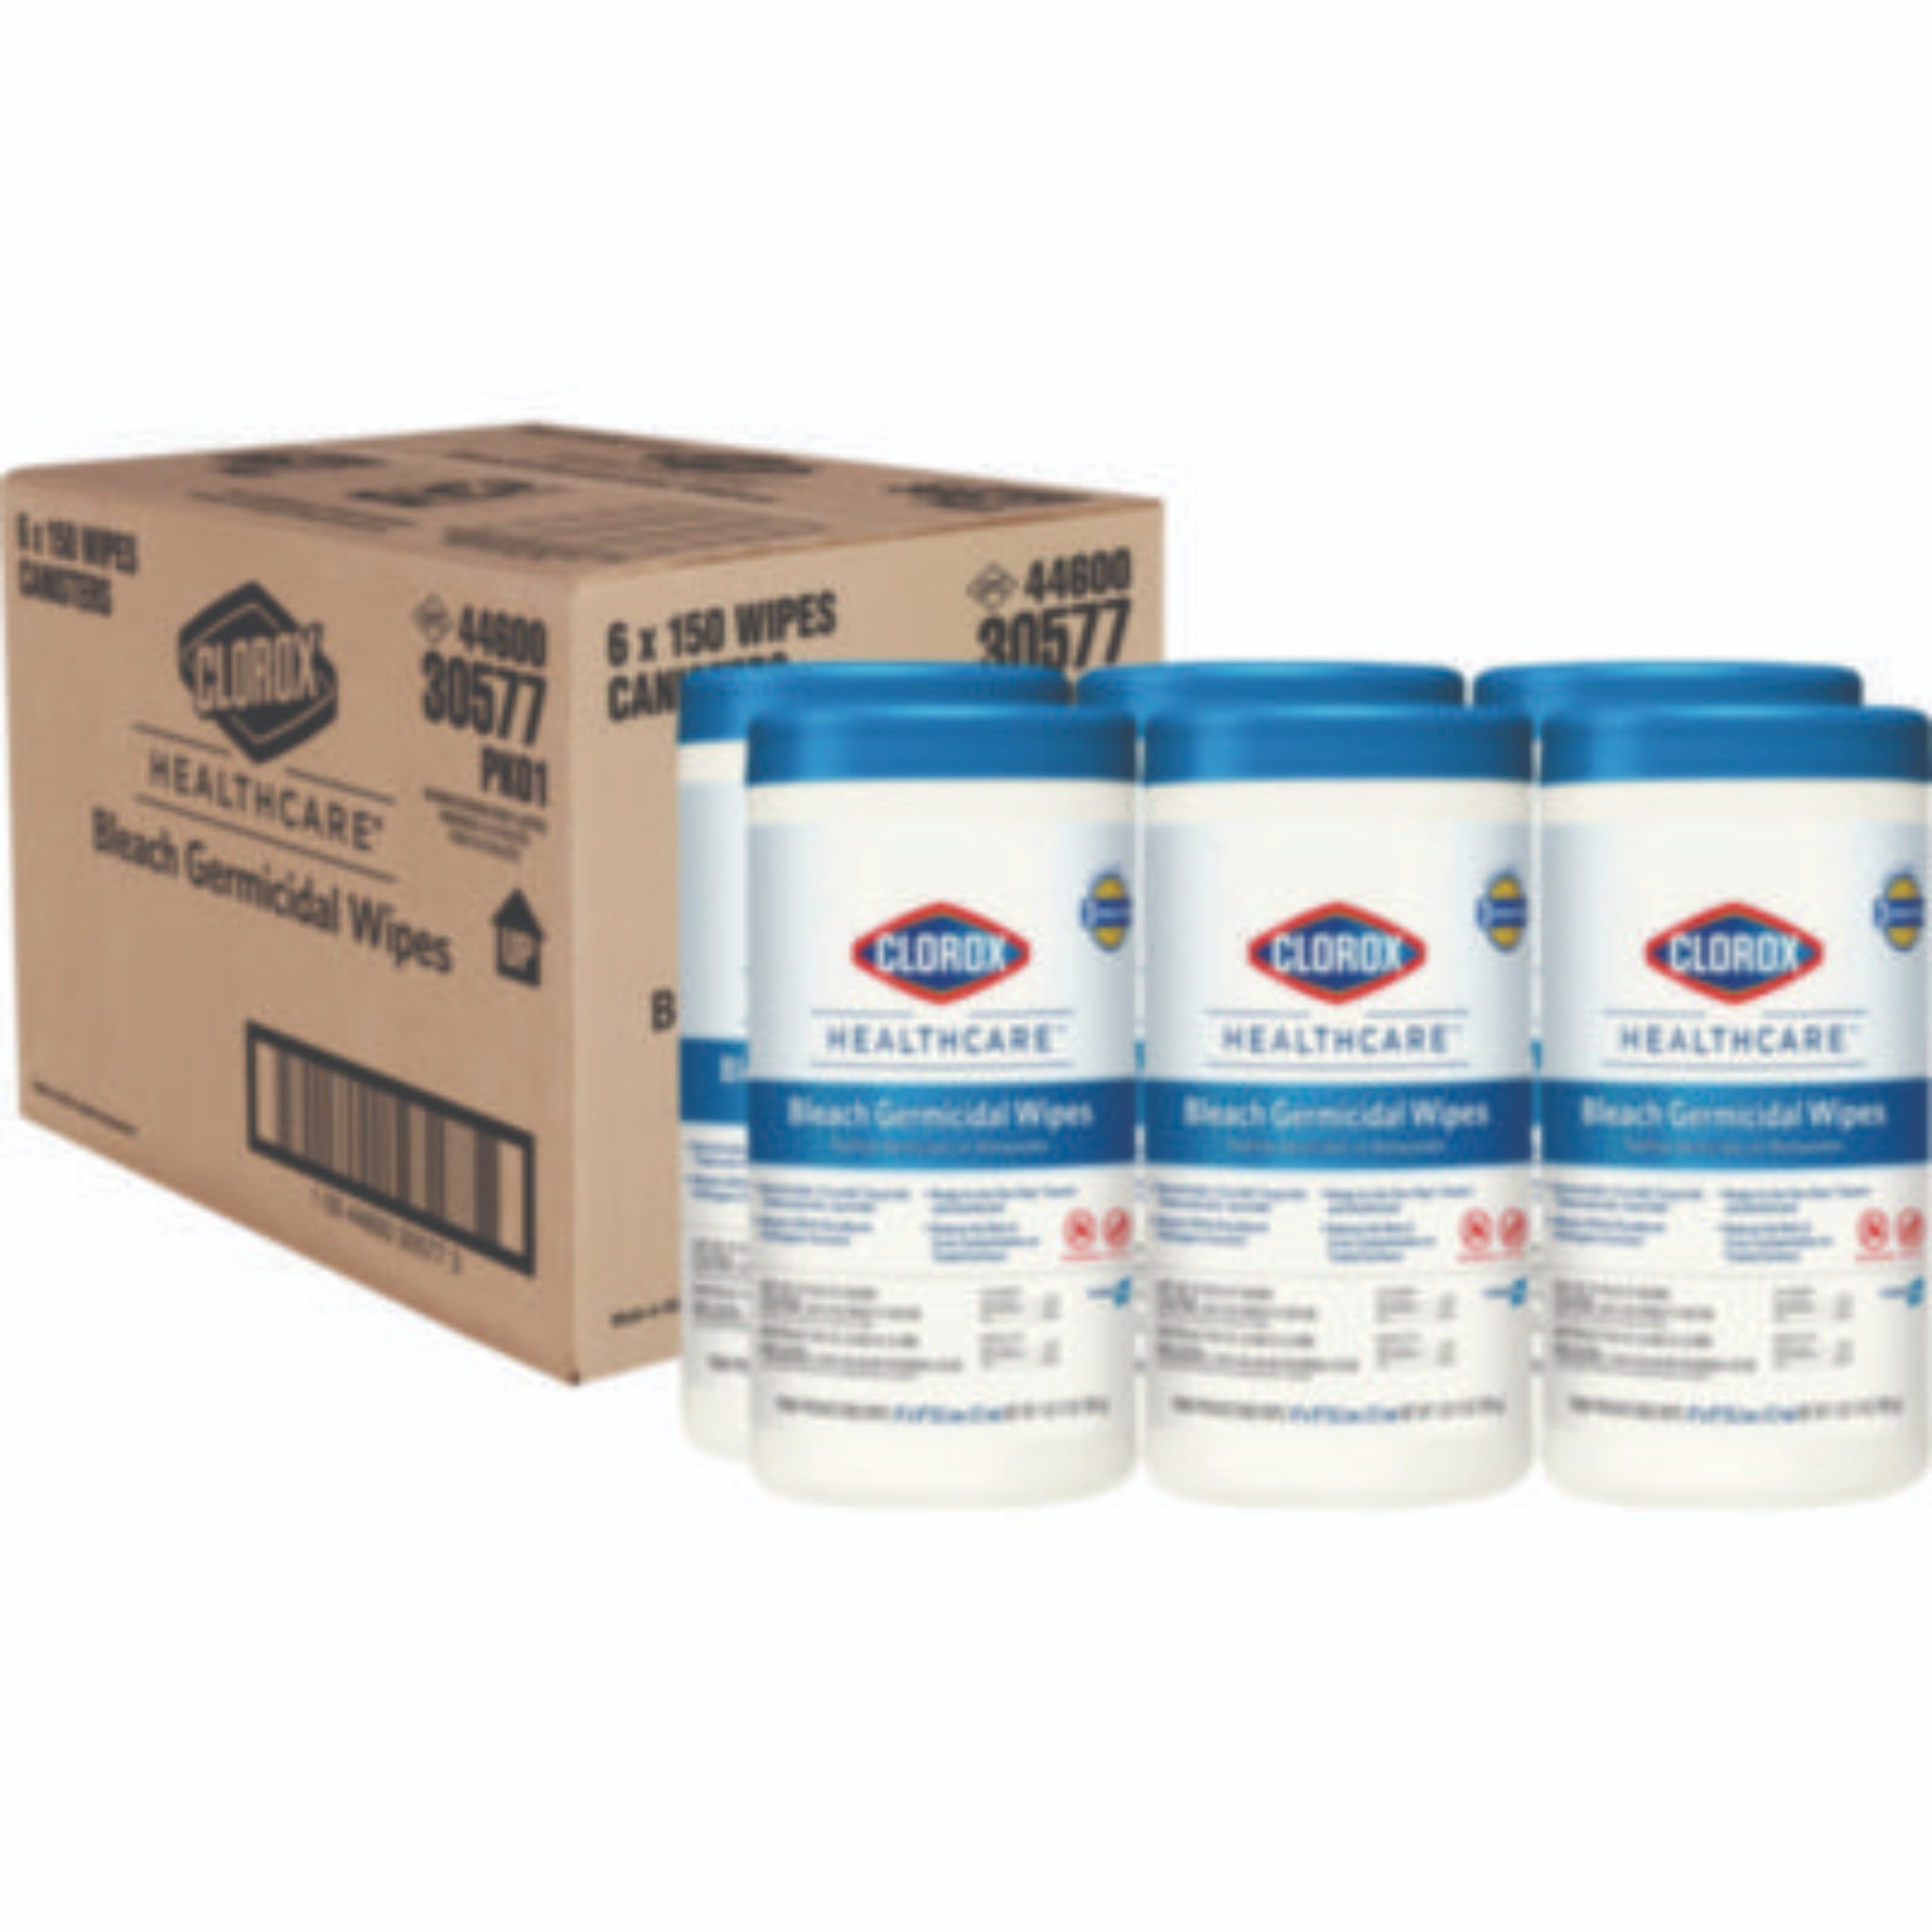 CLOROX SALES CO. CLO30577CT Bleach Germicidal Wipes, 1-Ply, 6 x 5, Unscented, White, Canister of 150, Carton of 6 Canisters